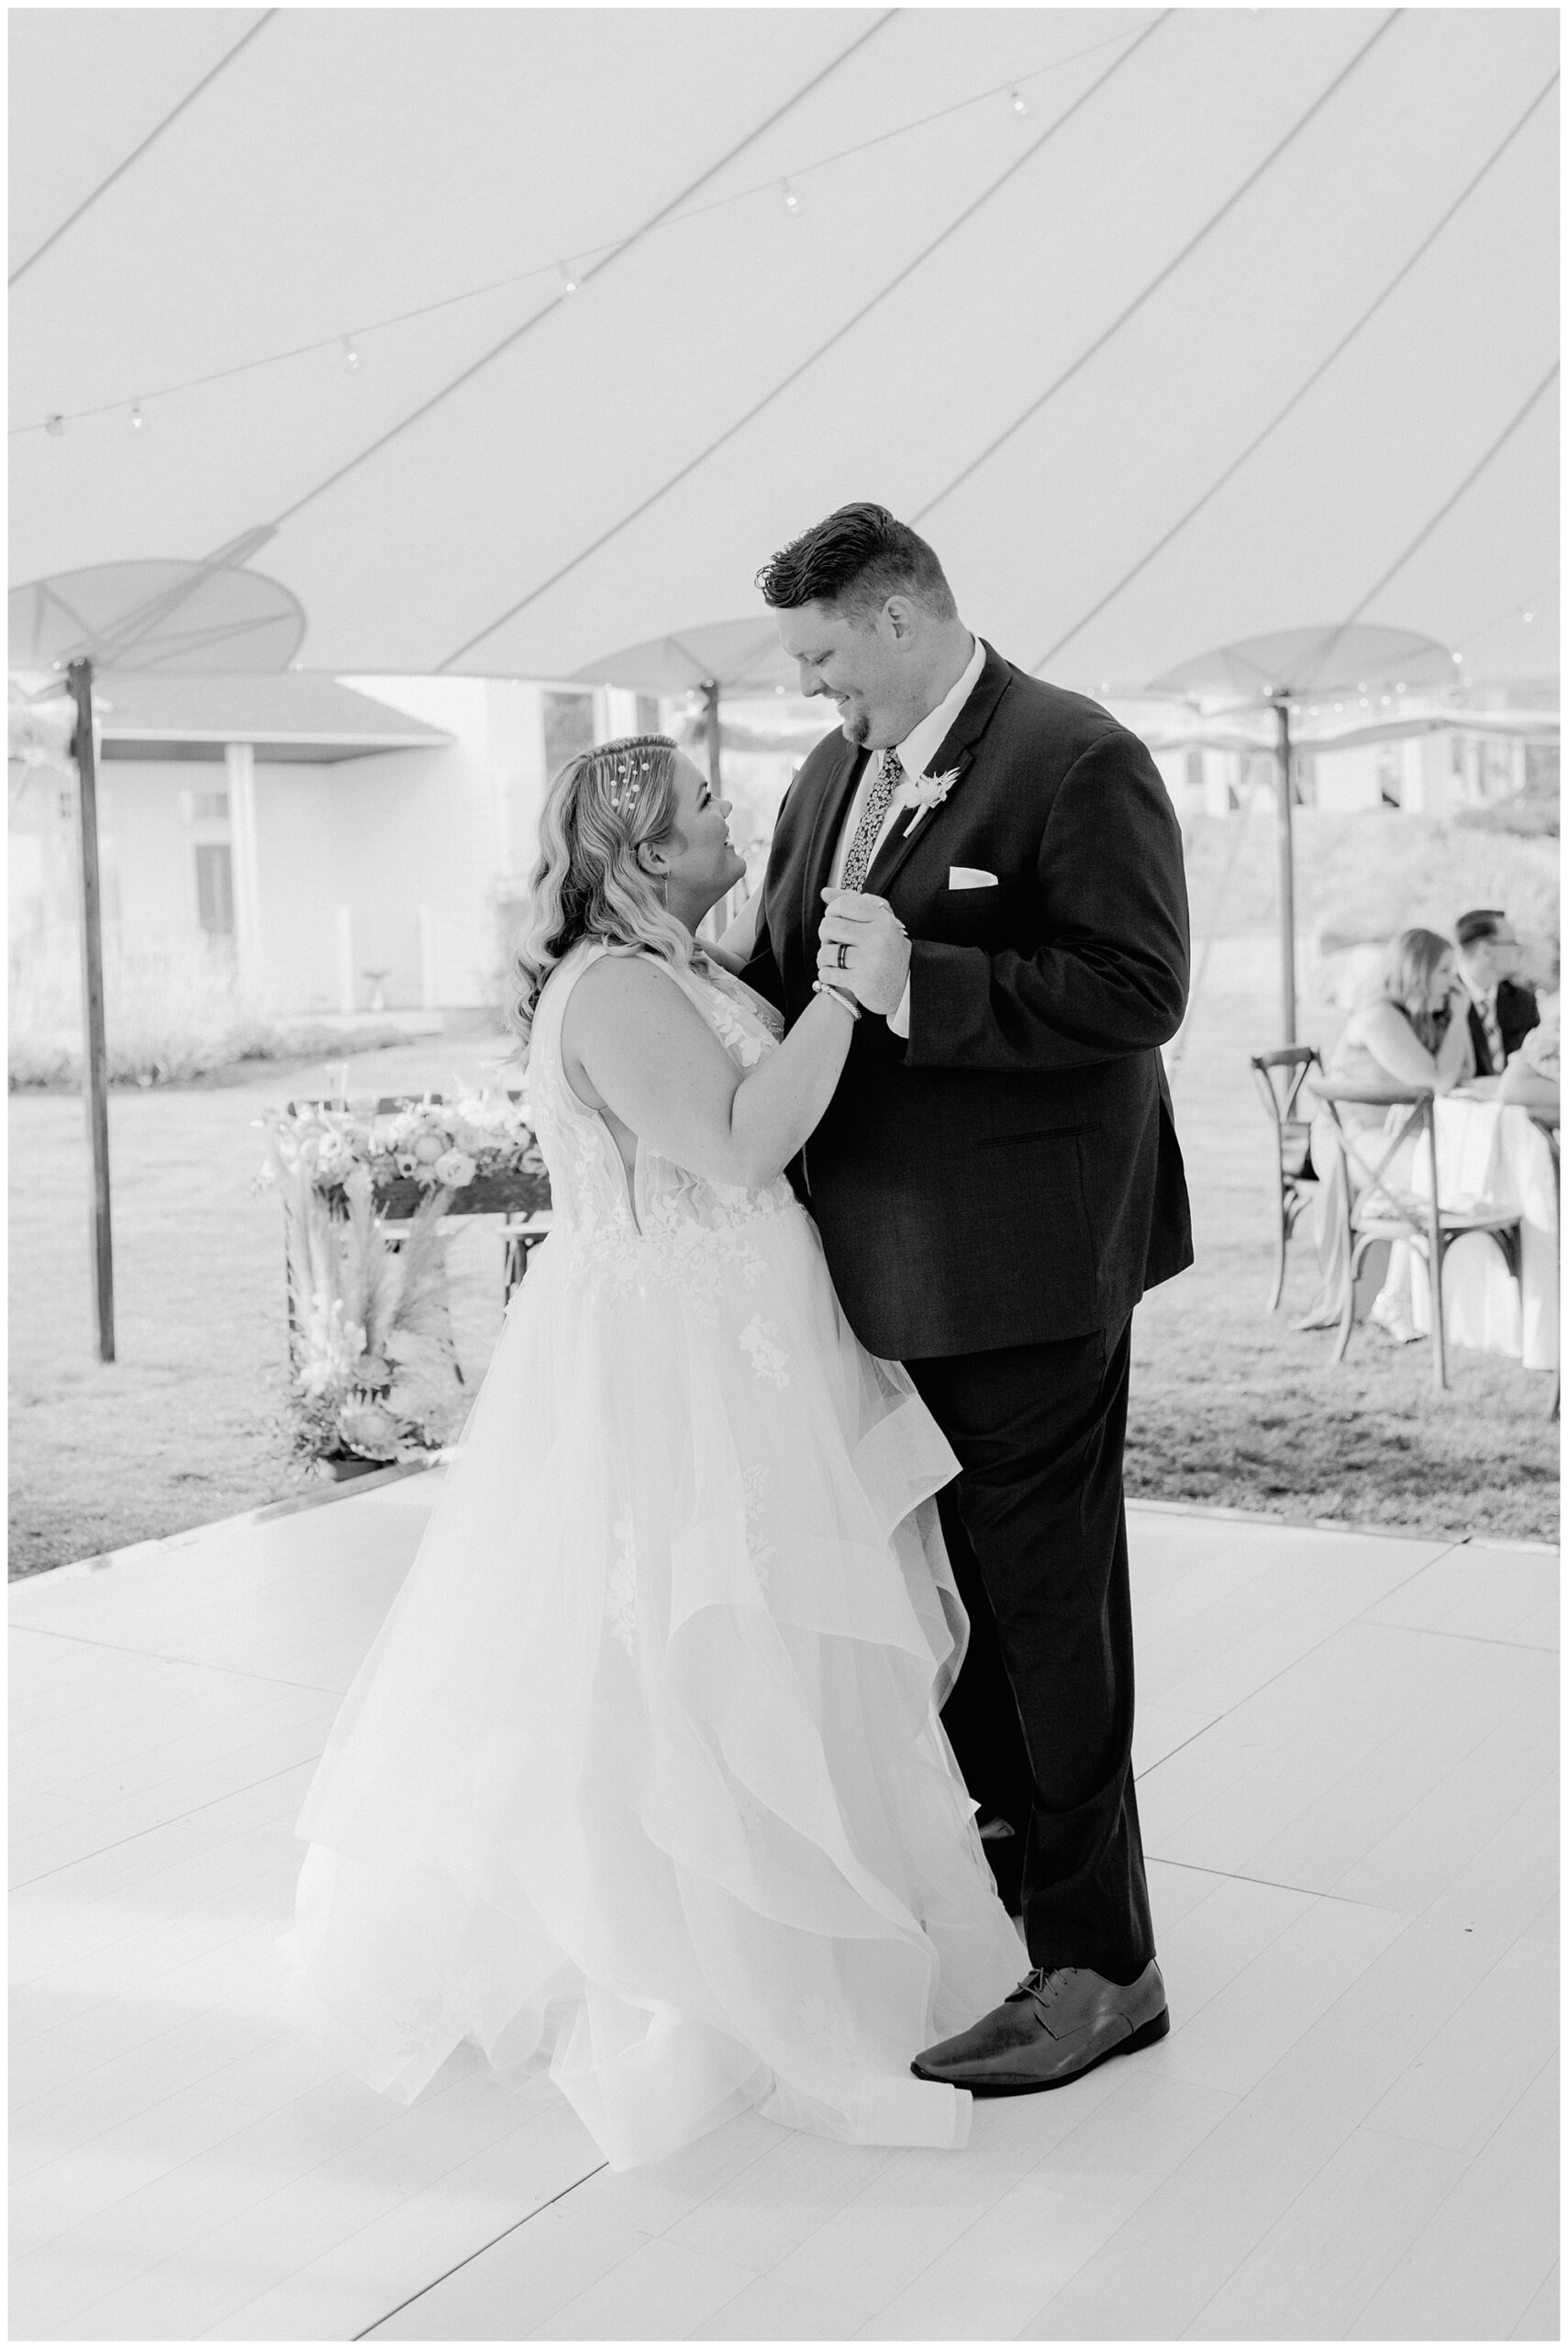 First dance photos in tented luxury wedding